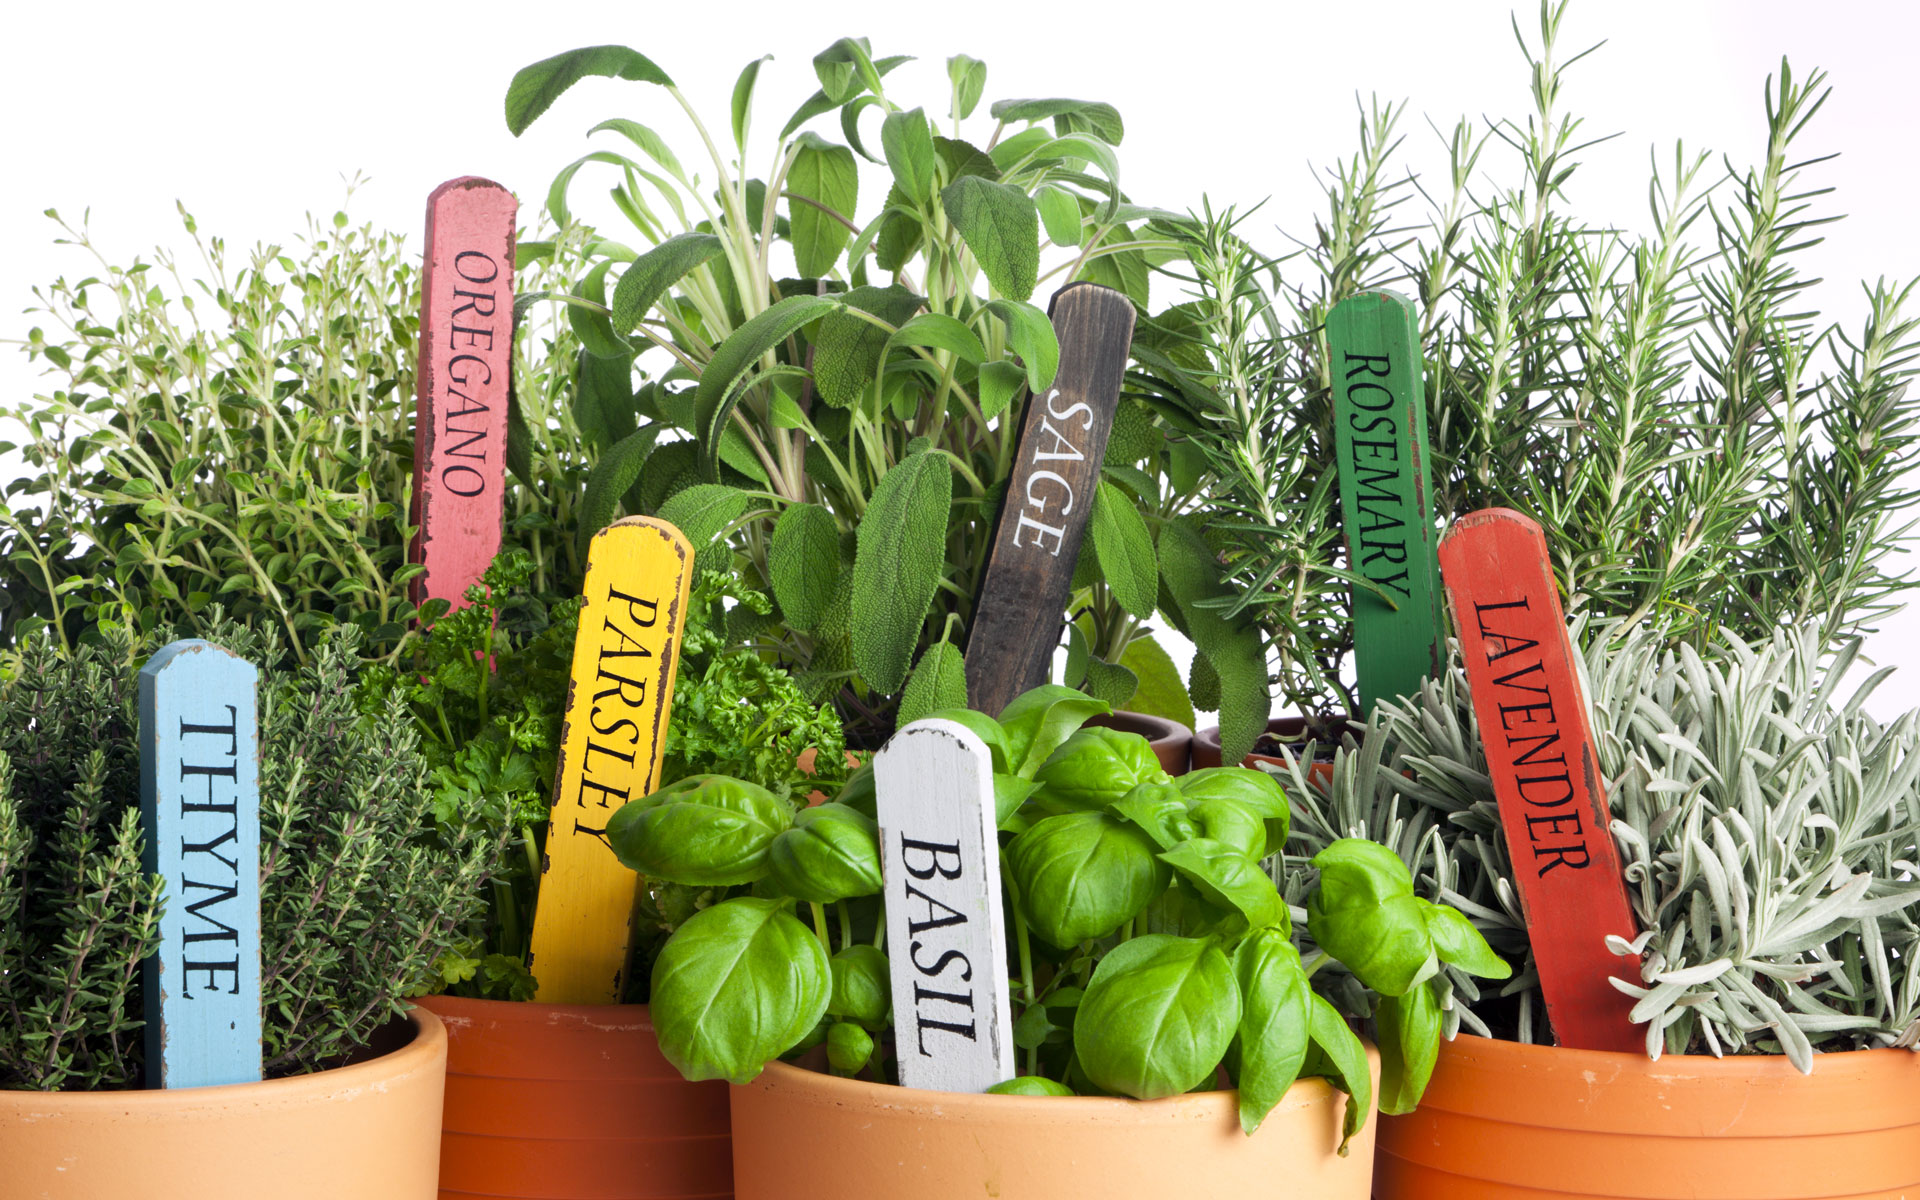 Herbs in plant pots: basil, lavender, thyme, parsley, oregano, sage, rosemary